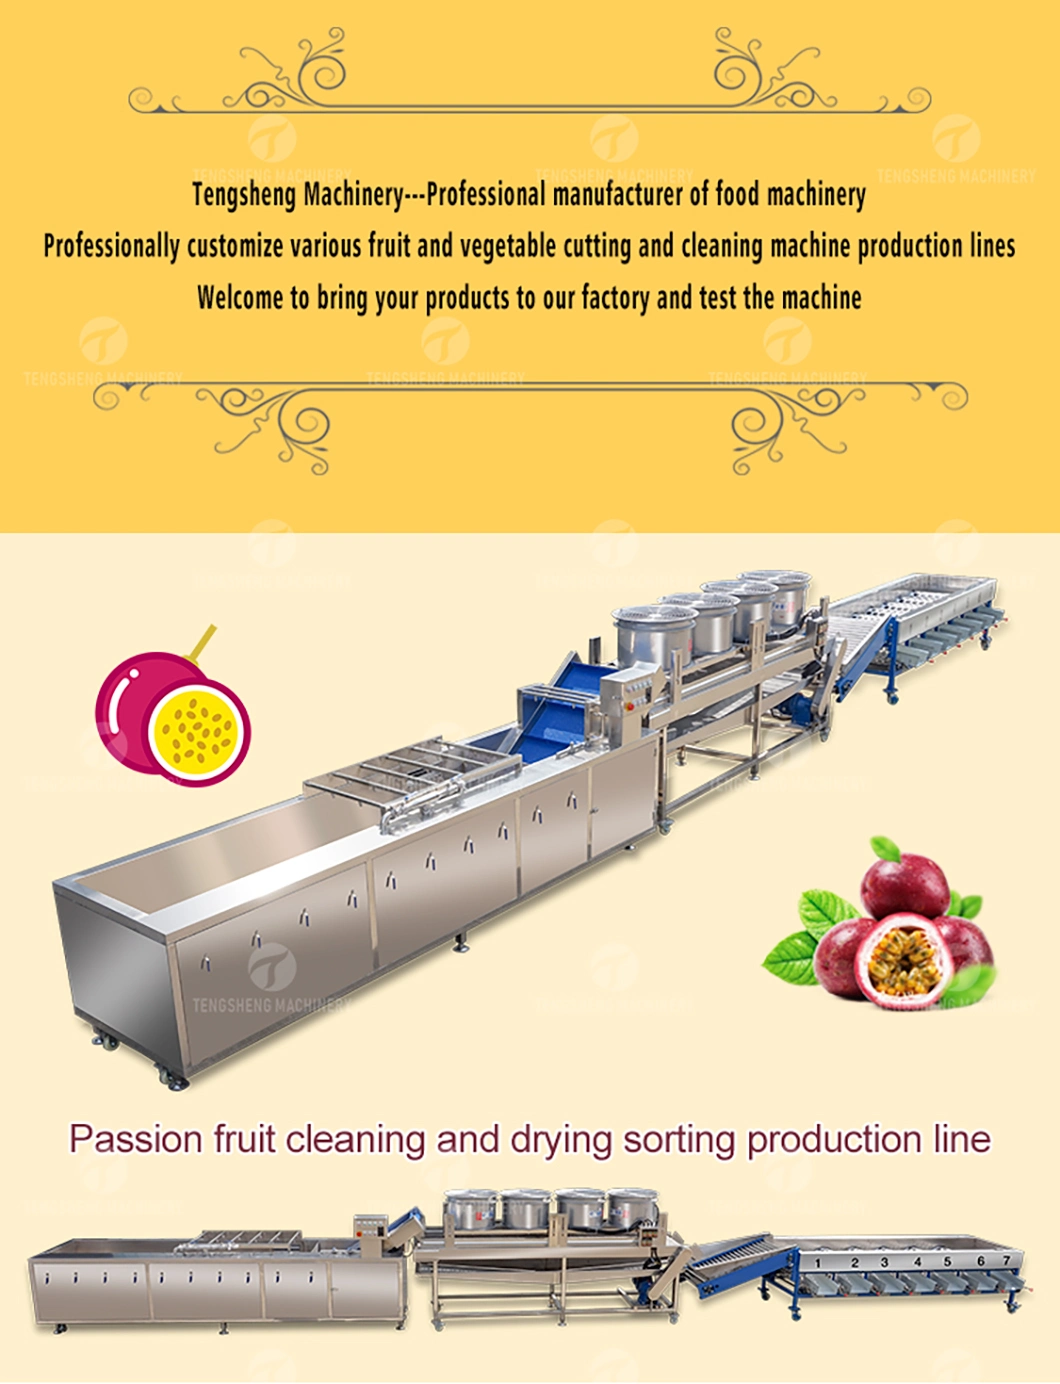 Commercial Automatic Fruit Sorting Machine/Citrus Onions Sorting Machine Food Processor (TS-FS670)